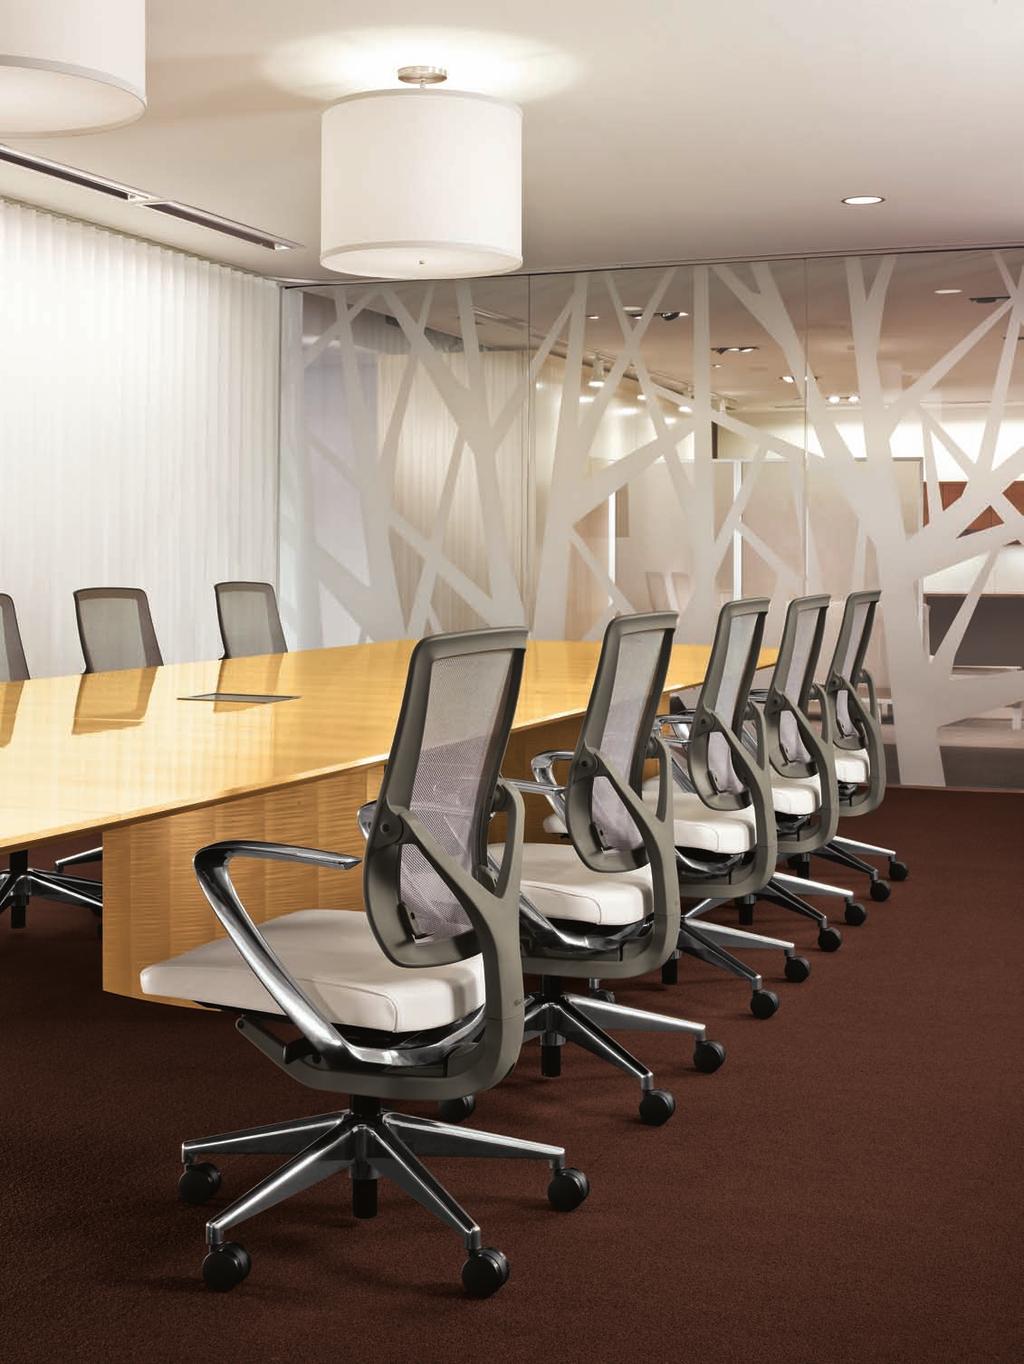 Conference Room Add elegance and simplicity to meeting areas with polished aluminum base, fixed C arms, and mesh back. ALLSTL10025_Relate_Broch_Reprint_Singles.